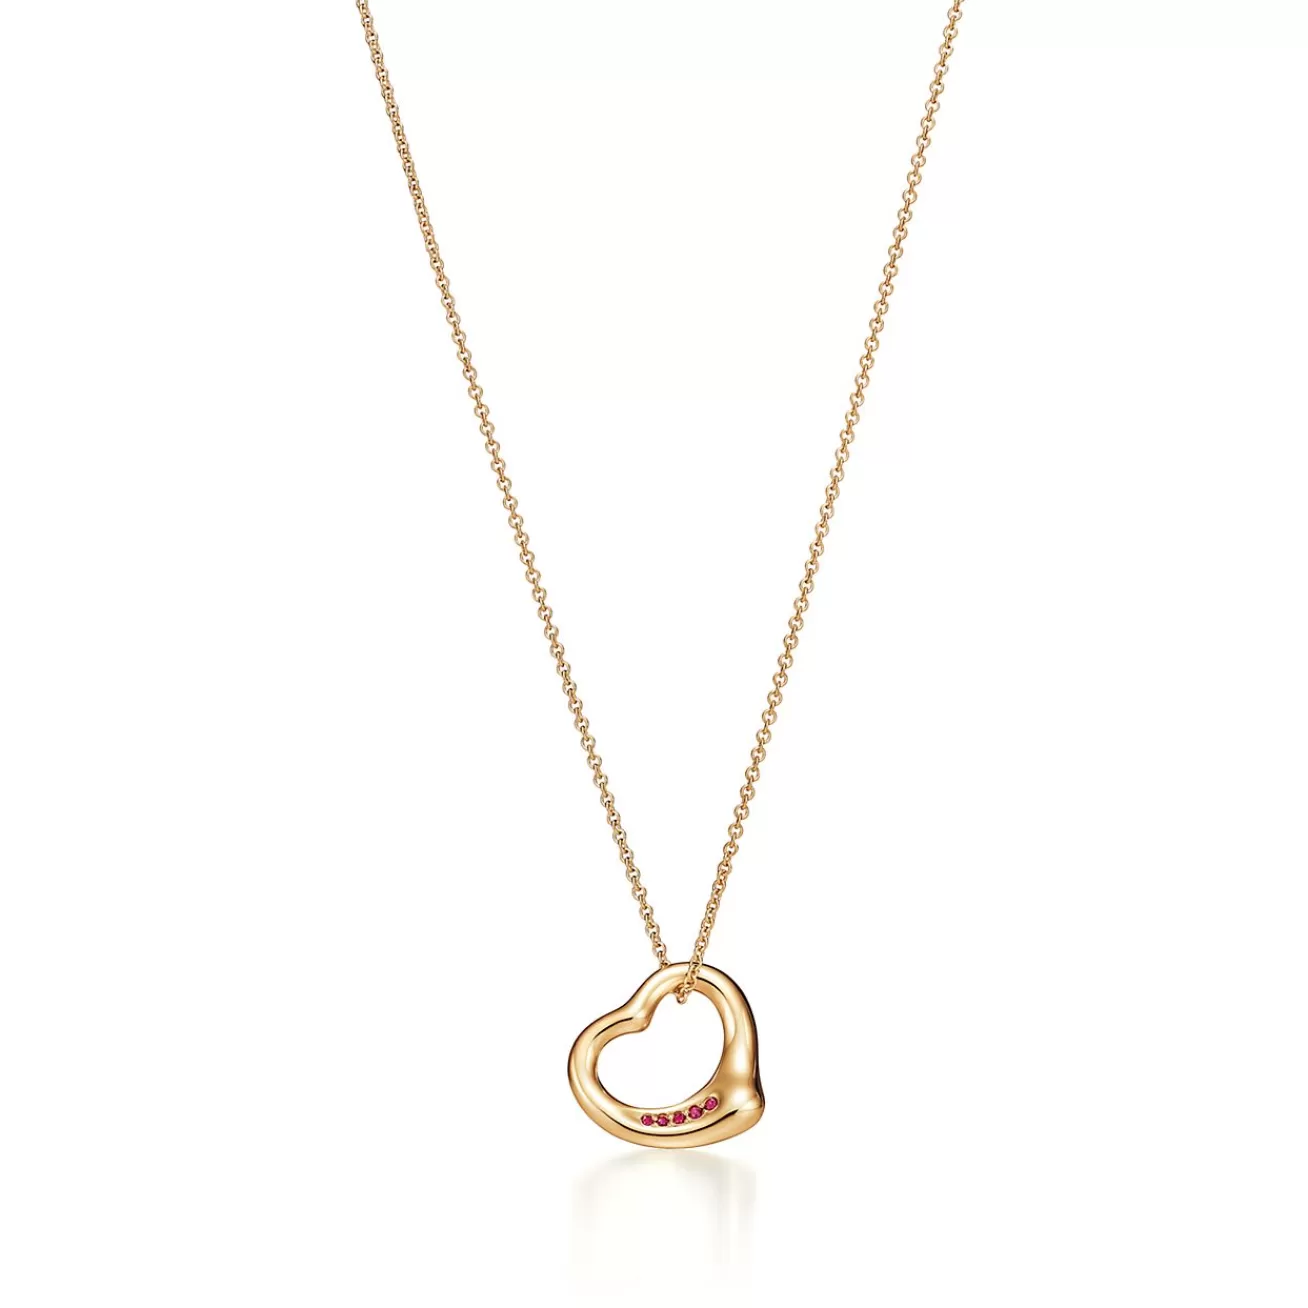 Tiffany & Co. Elsa Peretti® Open Heart Pendant in Yellow Gold with Rubies, 16 mm | ^ Necklaces & Pendants | Gold Jewelry